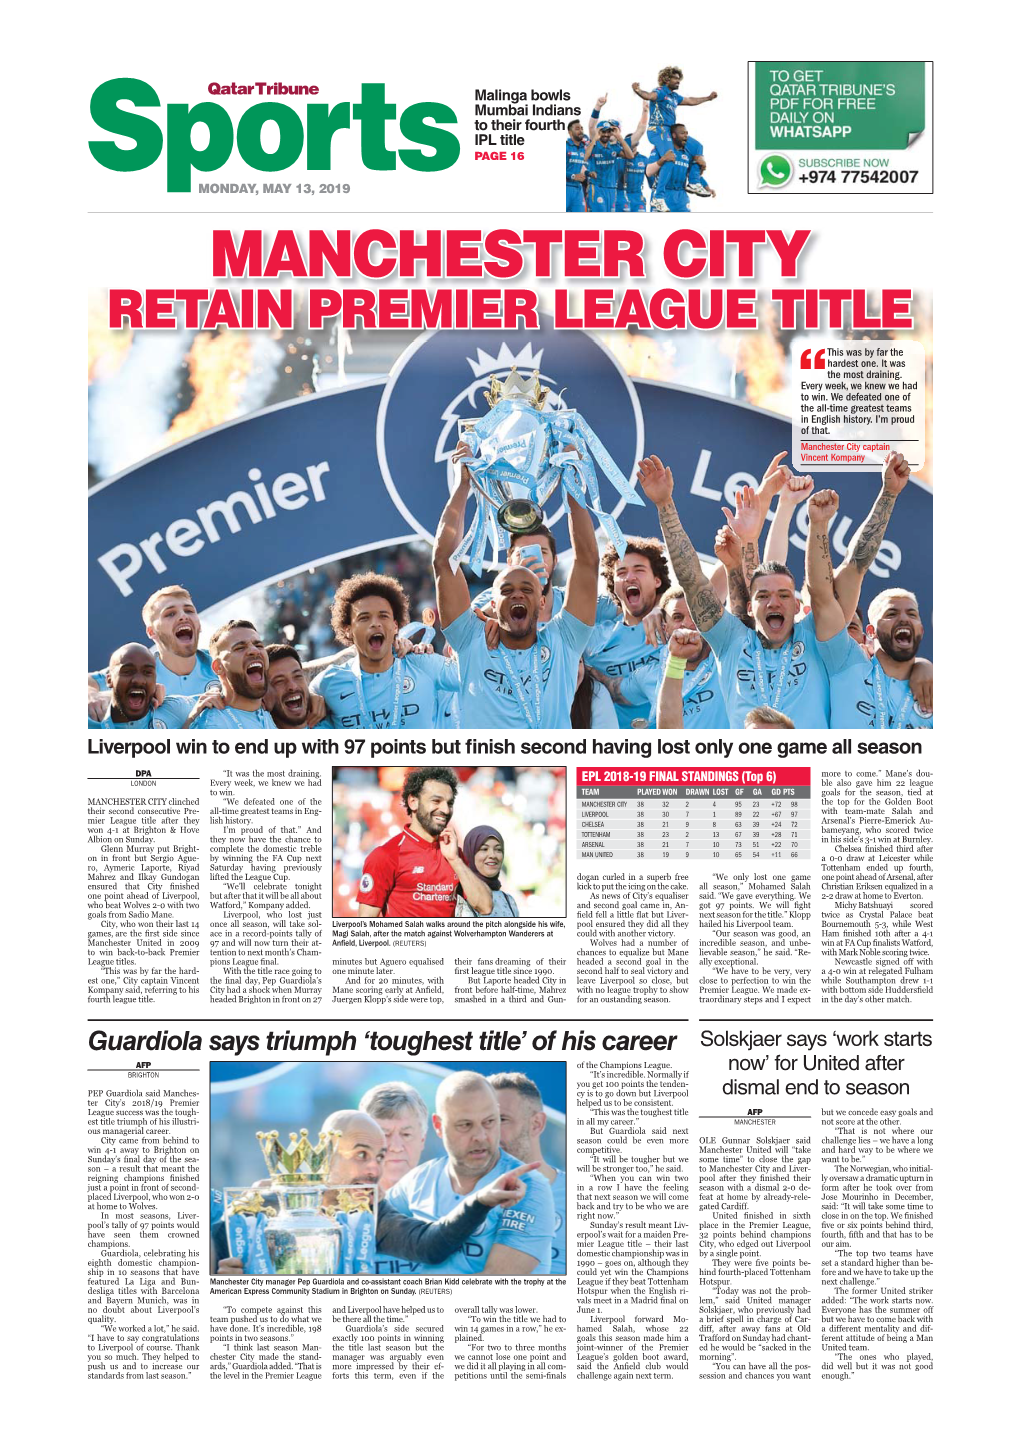 MANCHESTER CITY RETAIN PREMIER LEAGUE TITLE This Was by Far the Hardest One